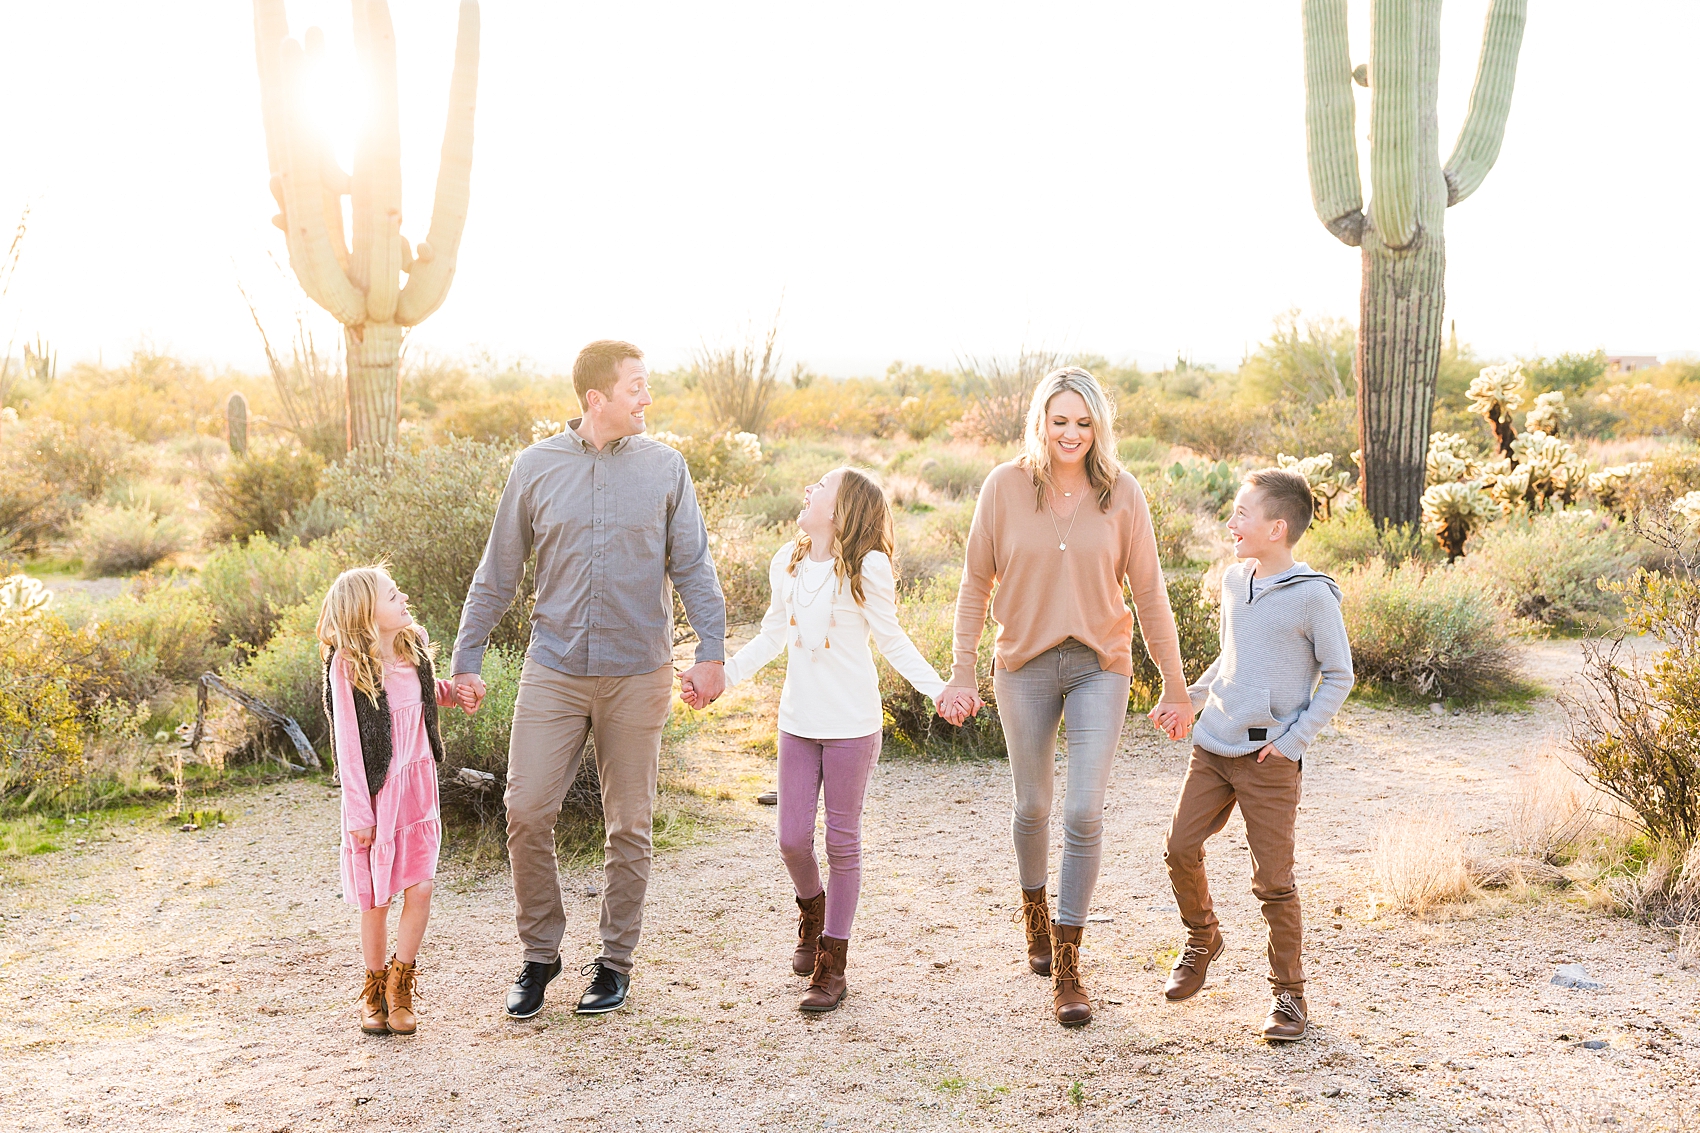 Leah Hope Photography | Scottsdale Phoenix Arizona | Desert Landscape Cactus Scenery | Saguaro | Extended Family Pictures | Family Photos | What to Wear | Family Poses